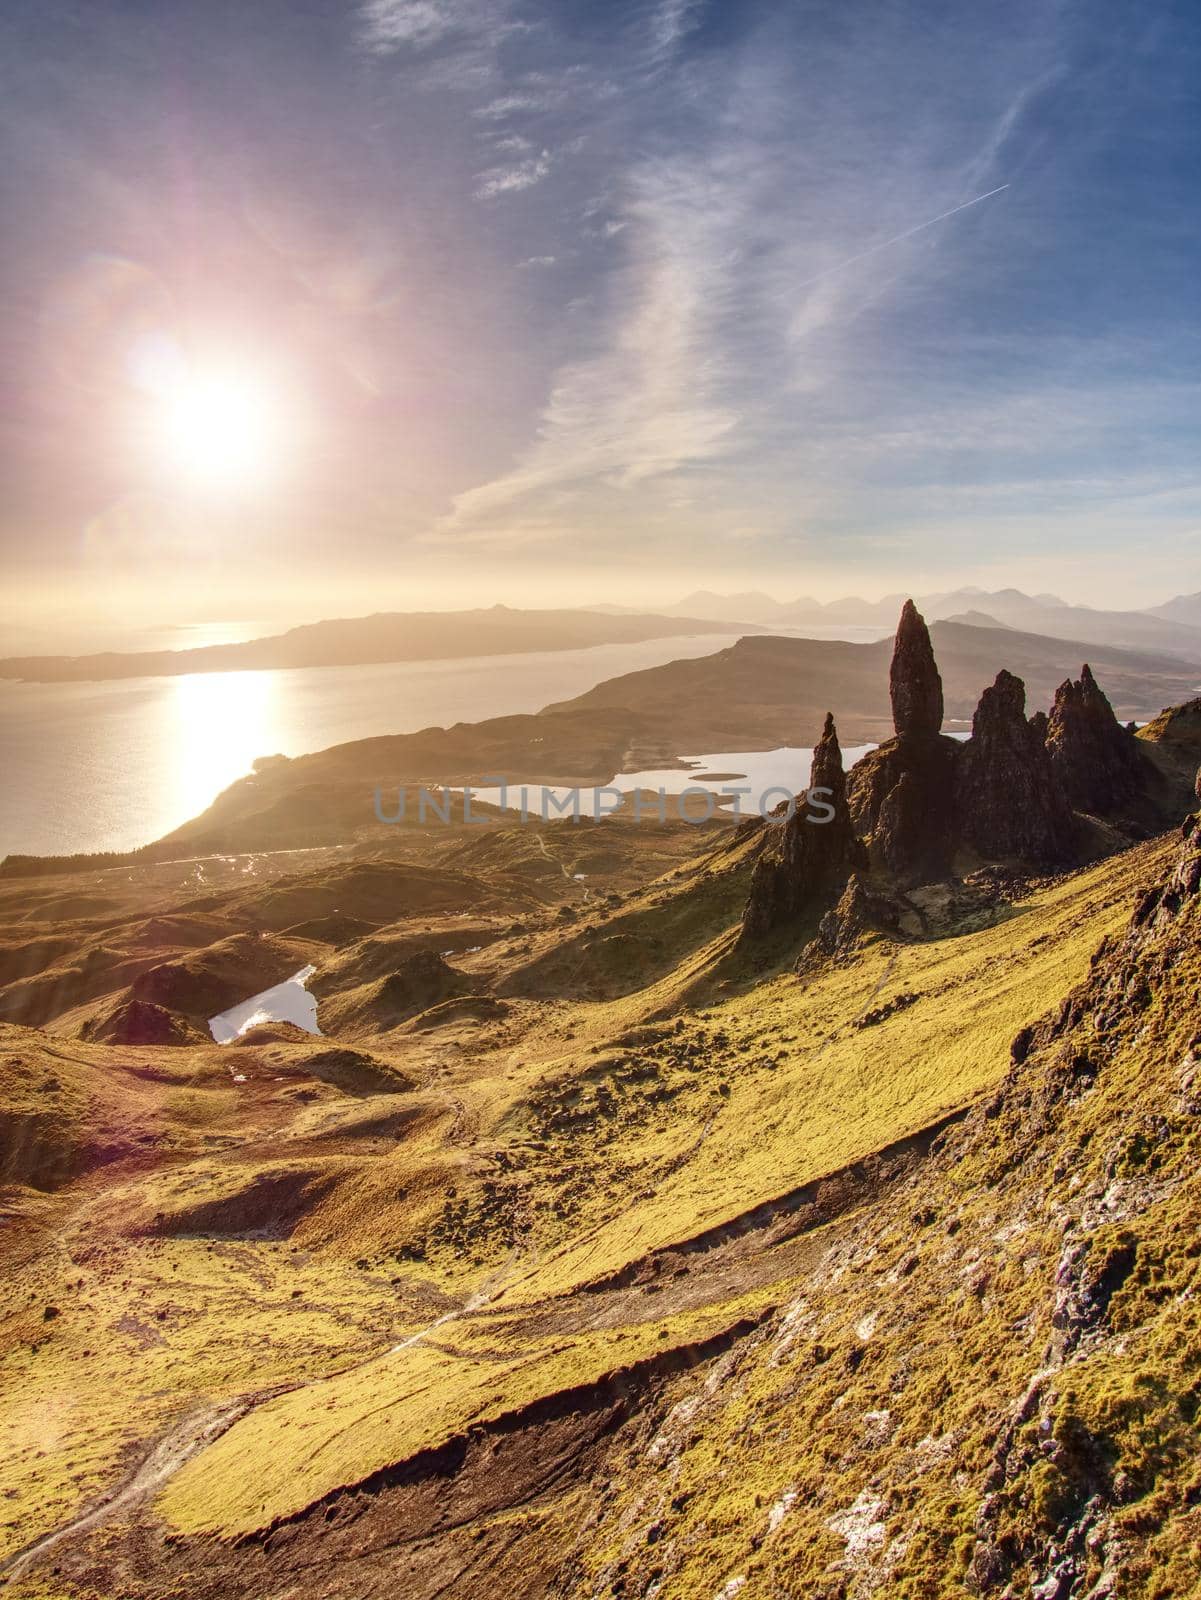 Hiking at  the Old Man of Storr. The Old Man of Storr is one of the most photographed wonders in the world.